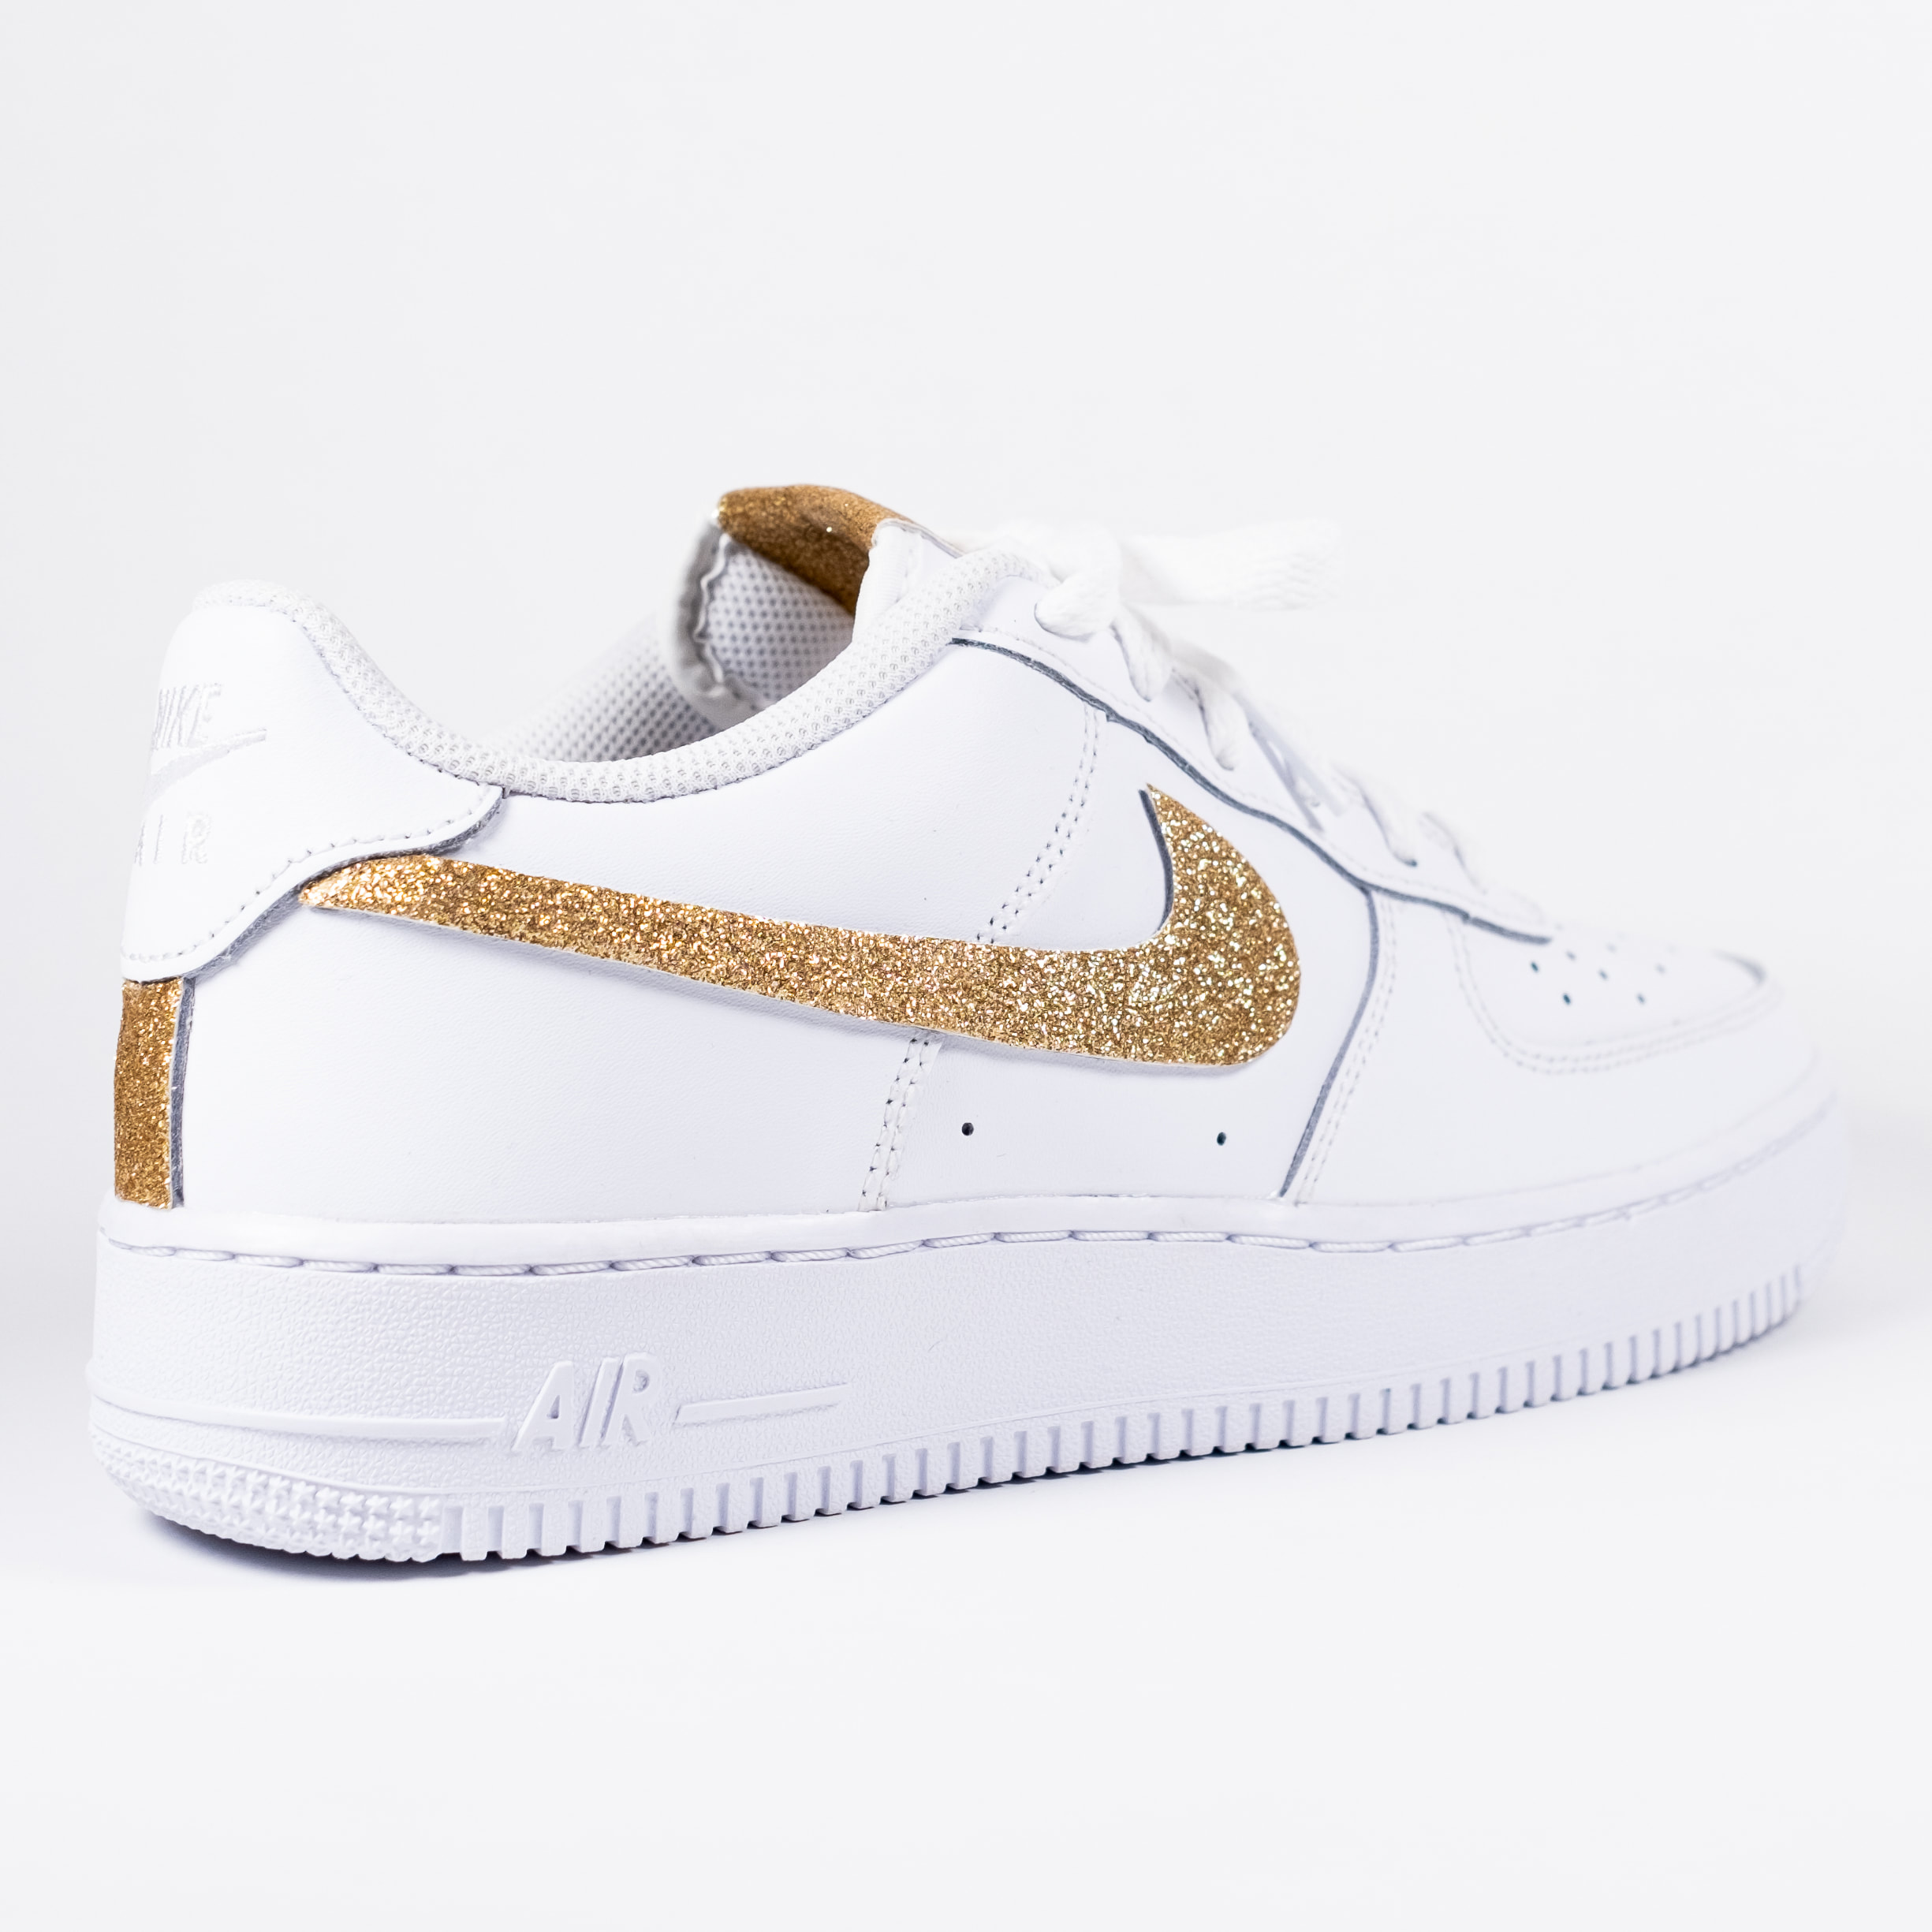 The Nike Air Force 1 High Metallic Gold Is Dressed To Impress